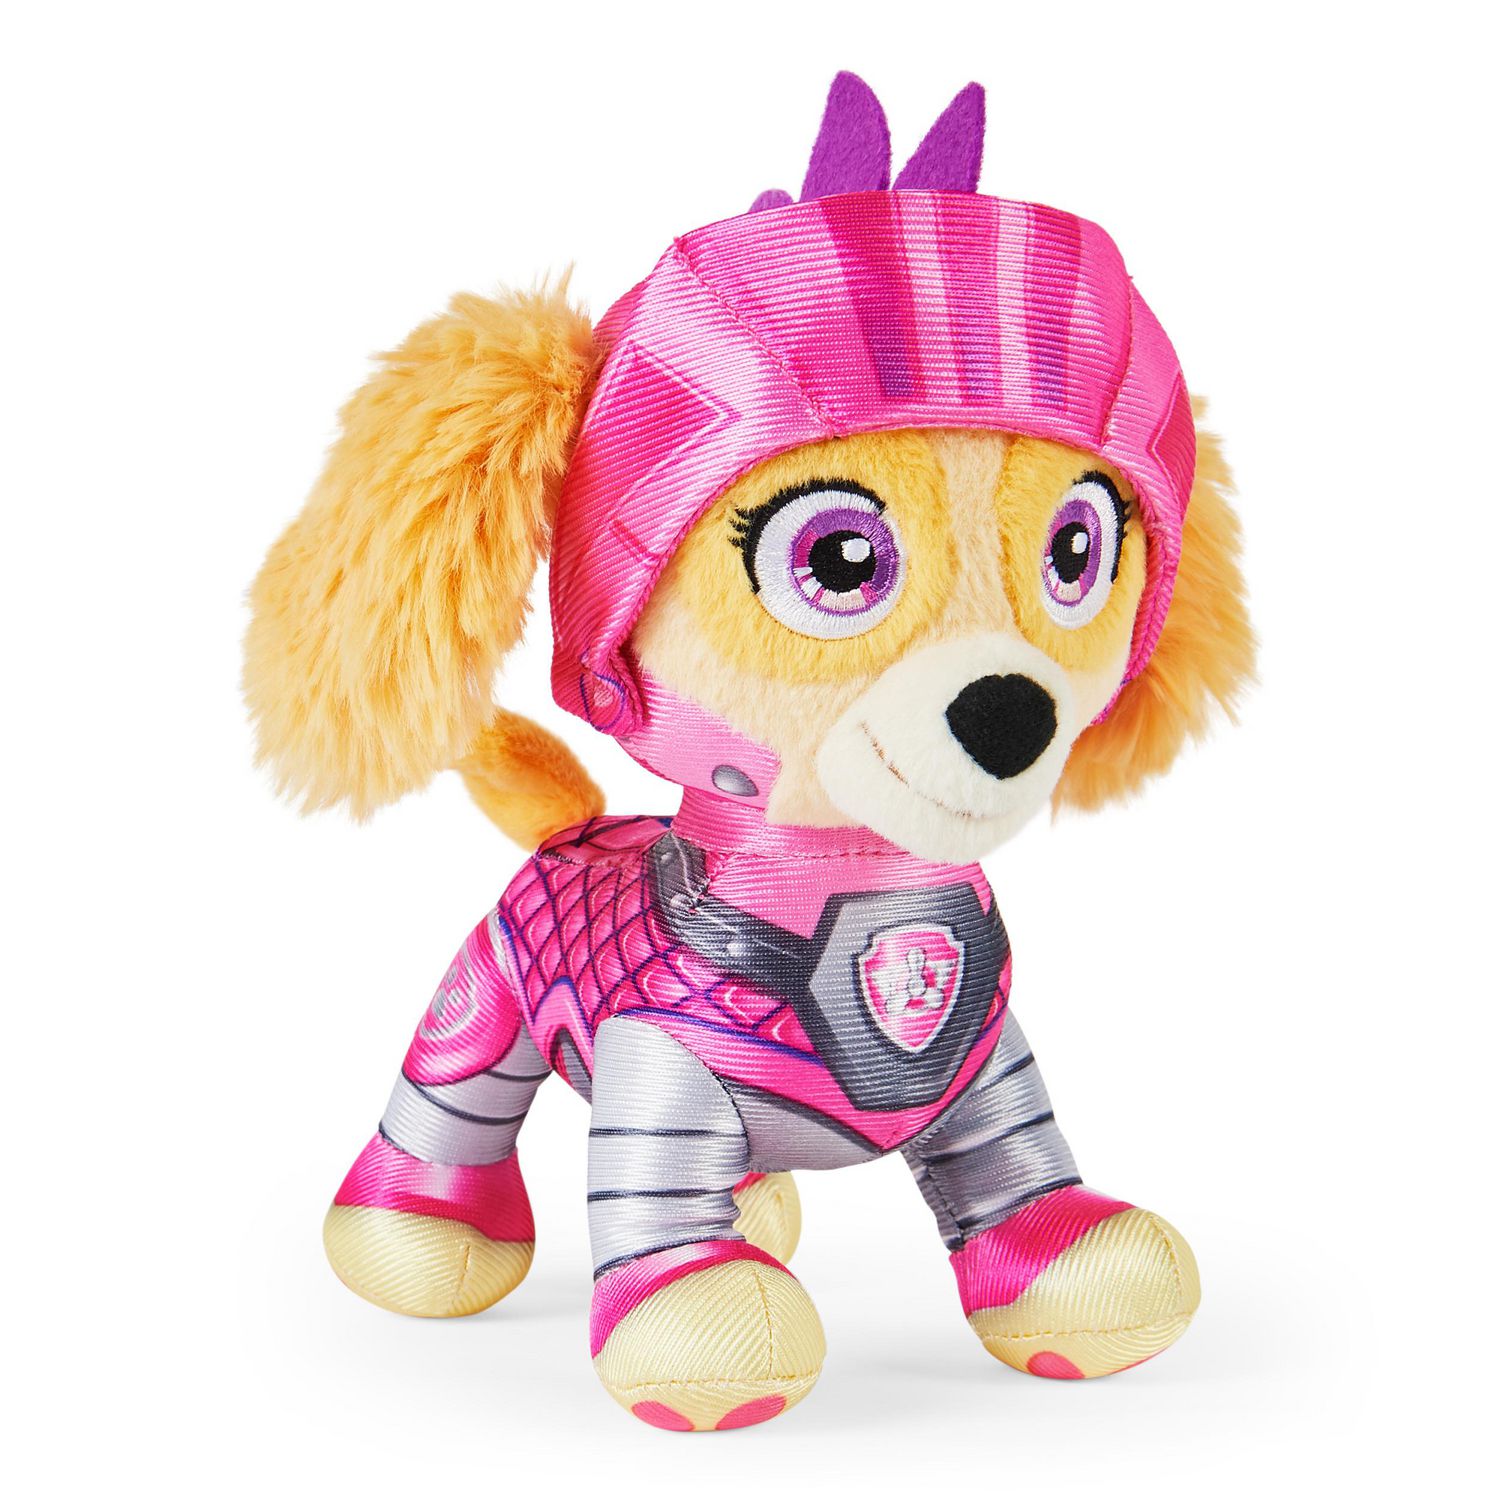 PAW Patrol, Rescue Knights Skye Stuffed Animal Plush Toy, 8-inch, Kids Toys  for Ages 3 and up | Walmart Canada